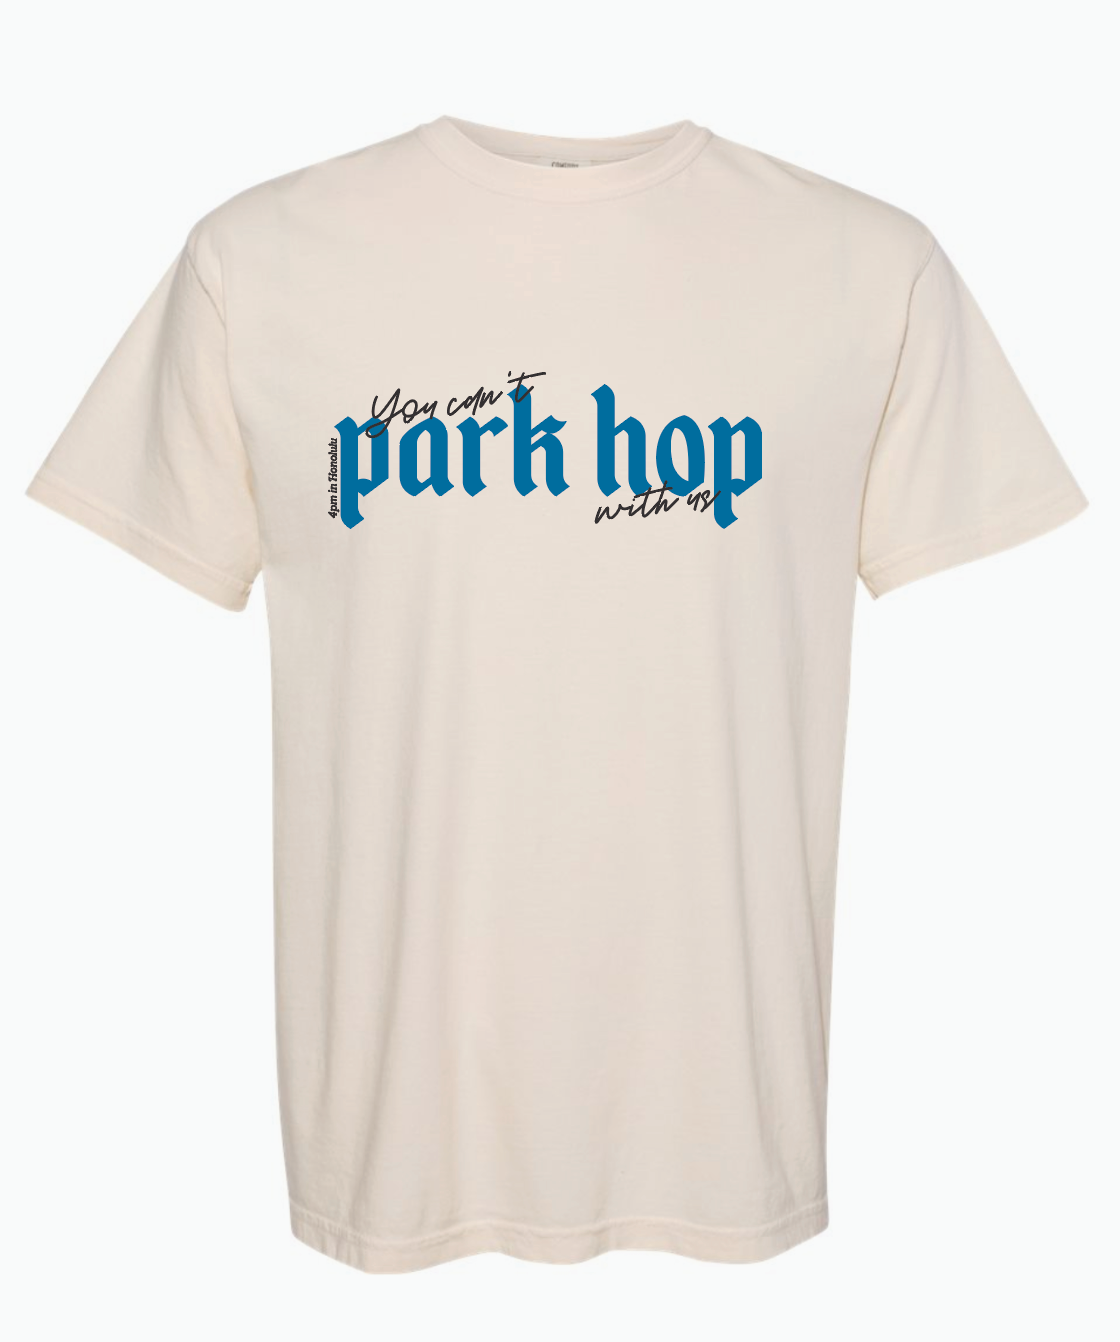 PRE-ORDER Adult Unisex "You can't park hop with us" Tee